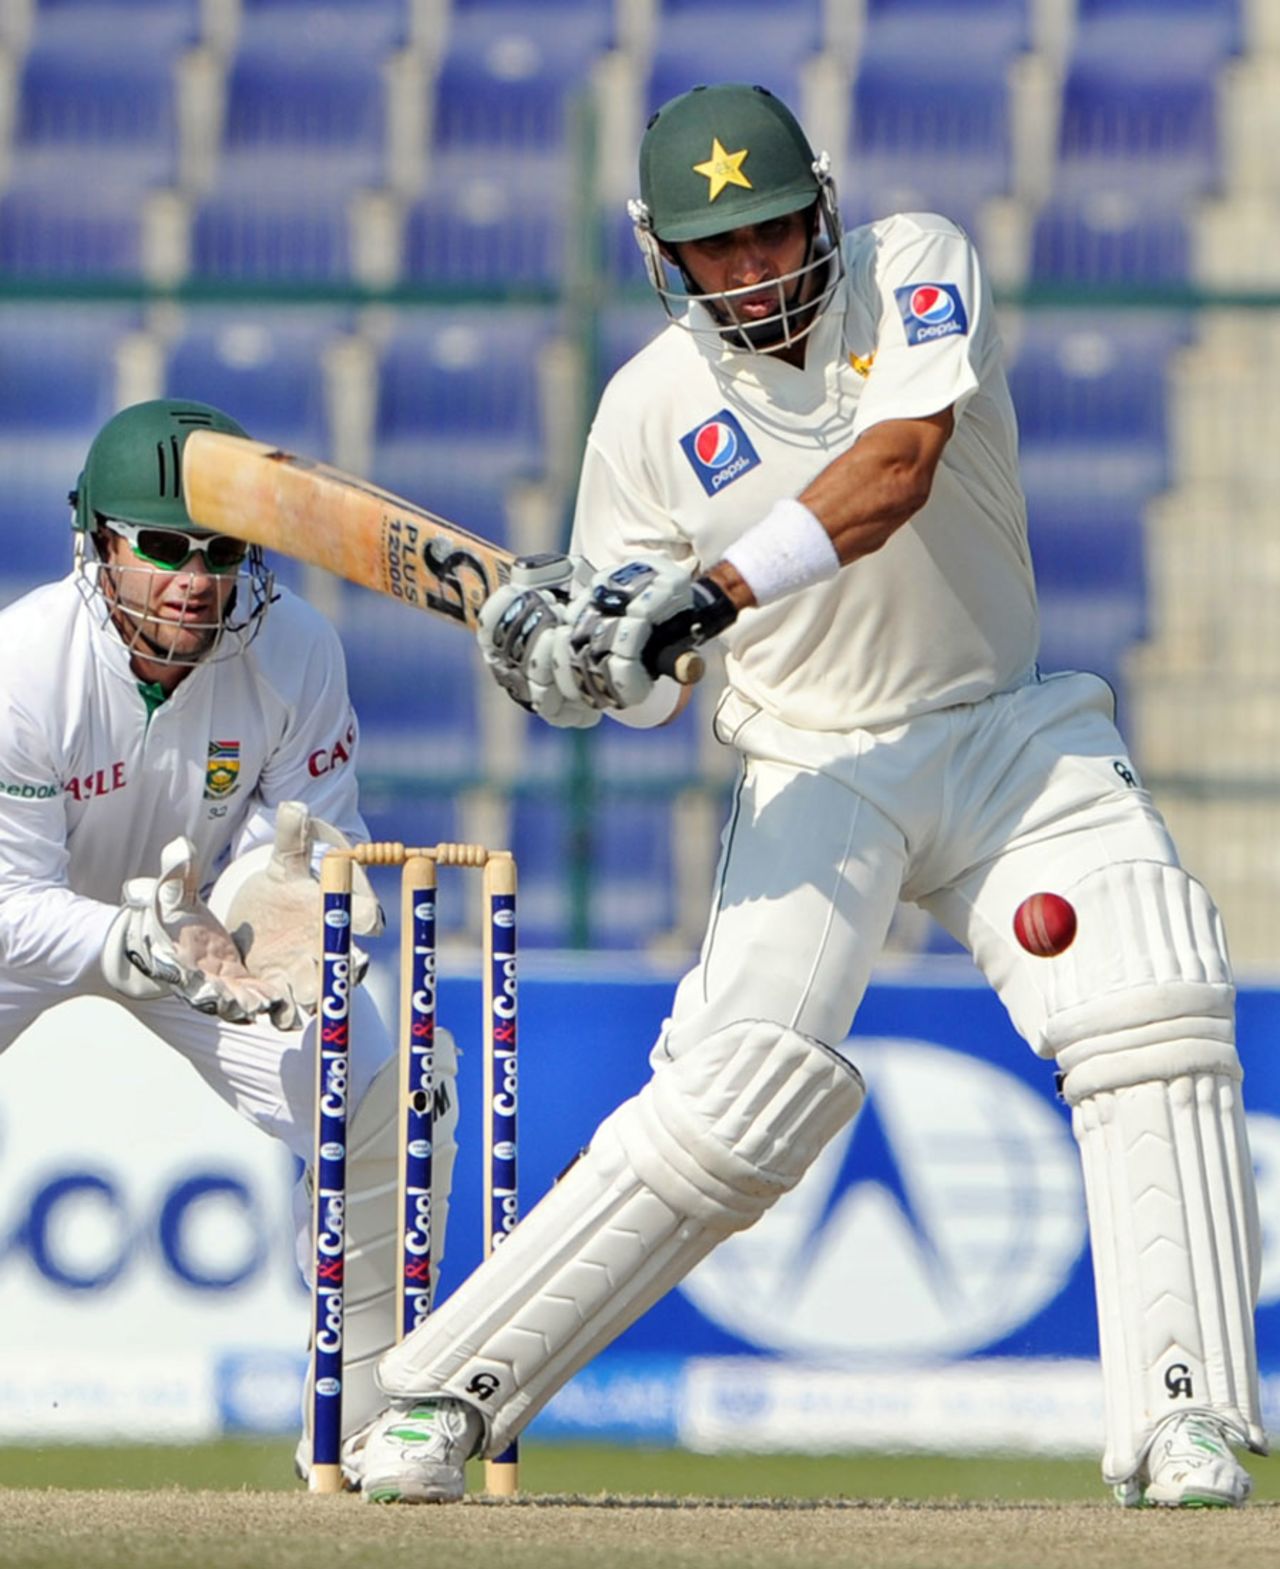 Misbah-ul-haq plays a pull shot en route to his half-century, Pakistan v South Africa, 2nd Test, Abu Dhabi, 5th day, November 24, 2010